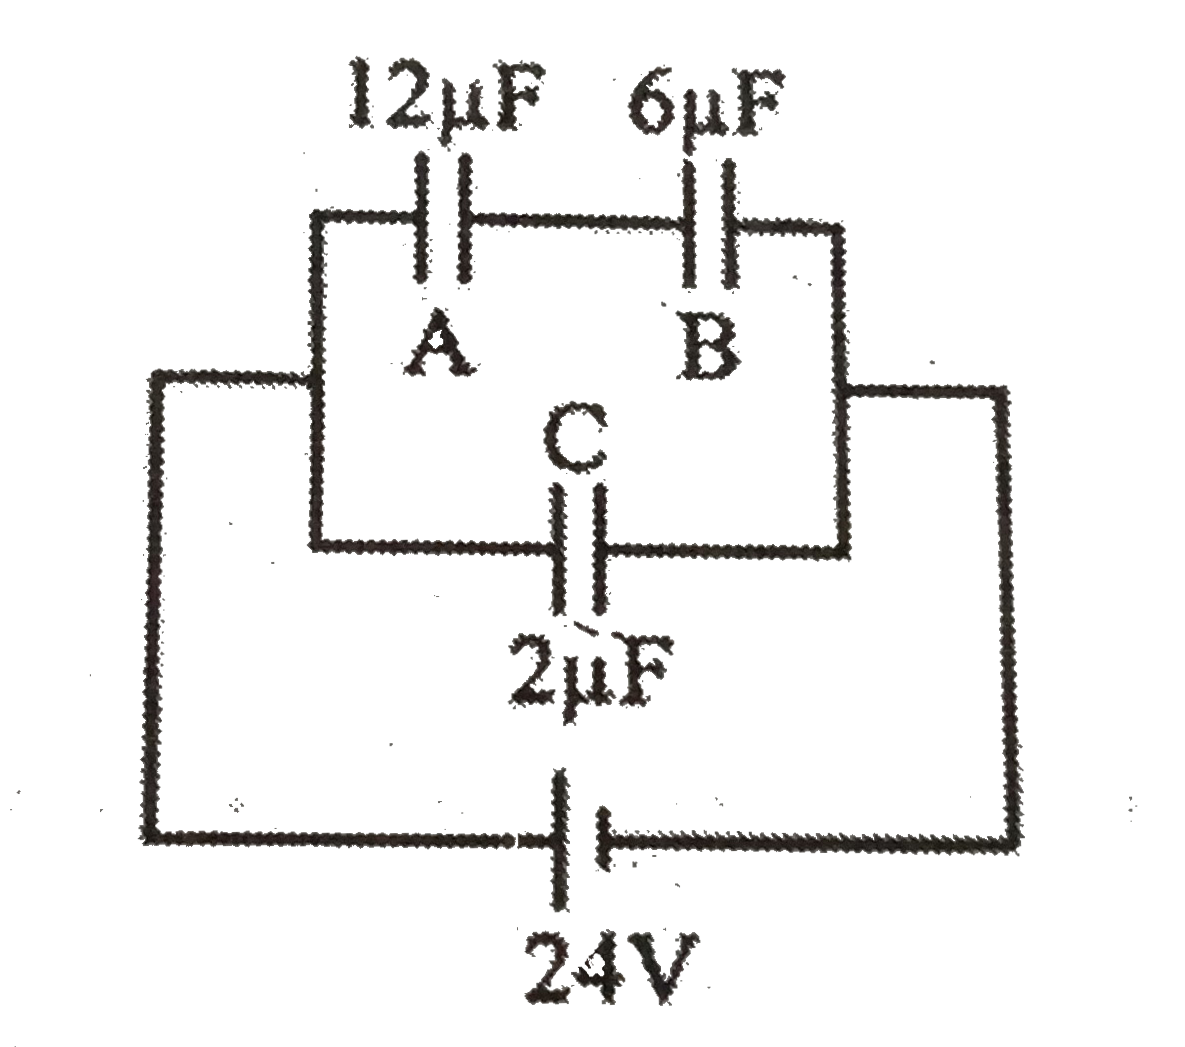 For the circuit shown in figure the charges on three capacitors, A, B and C are respectively